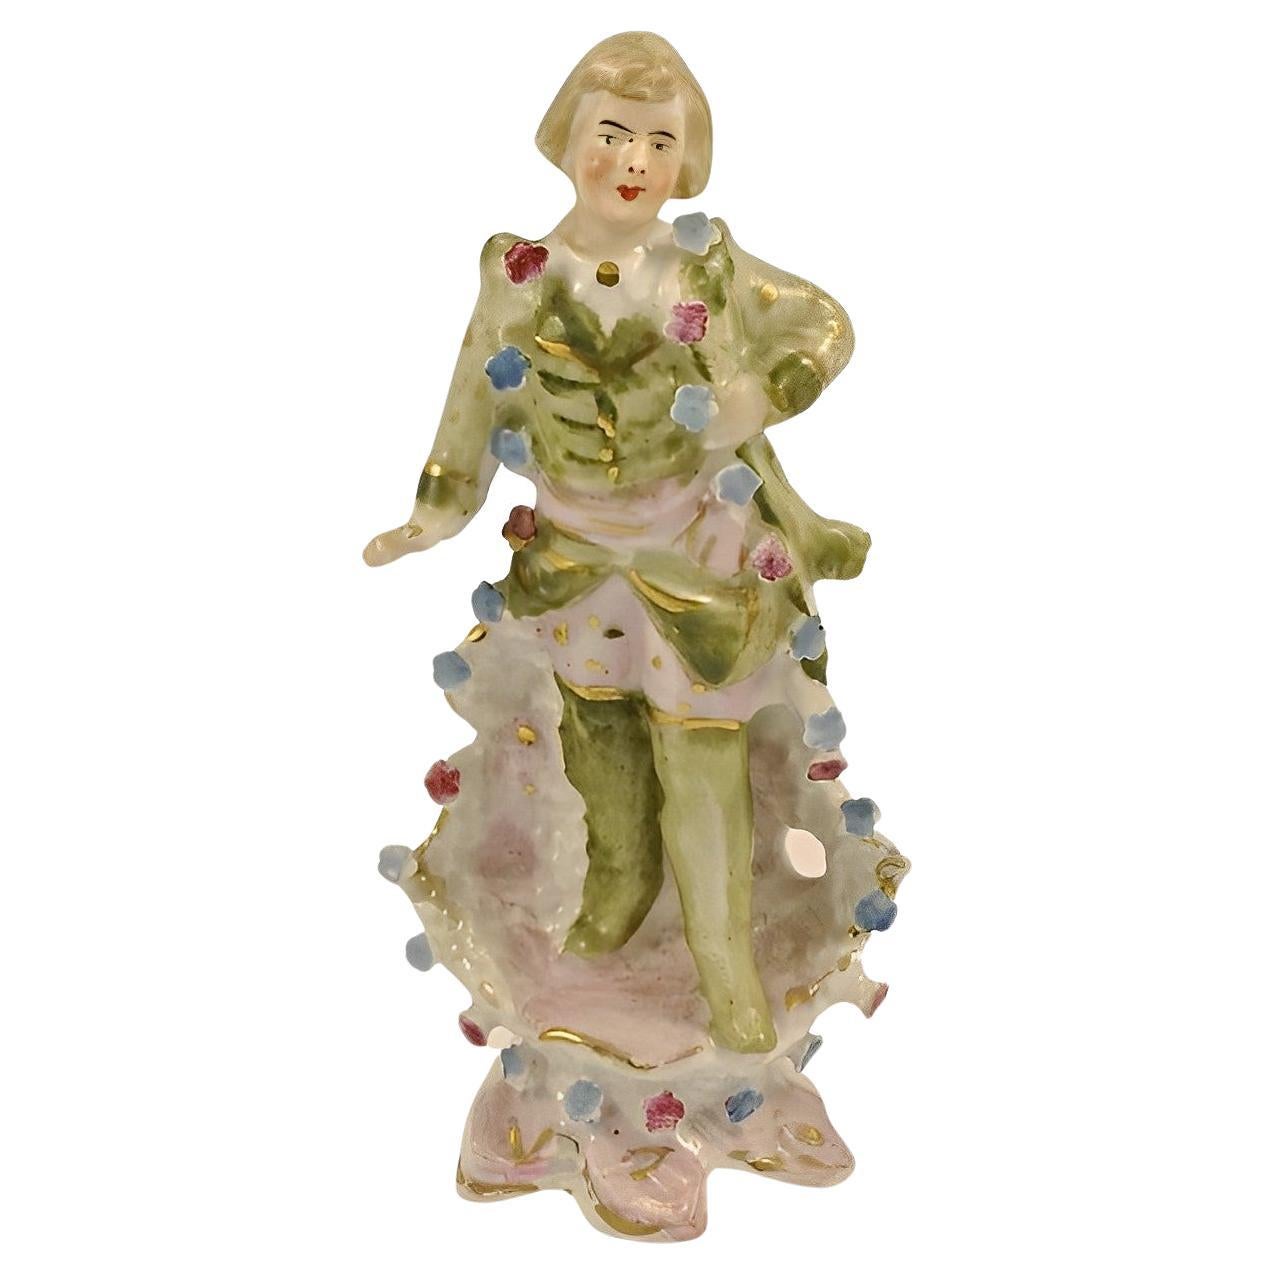 Antique Hand Painted Porcelain Man Figurine with Flowers